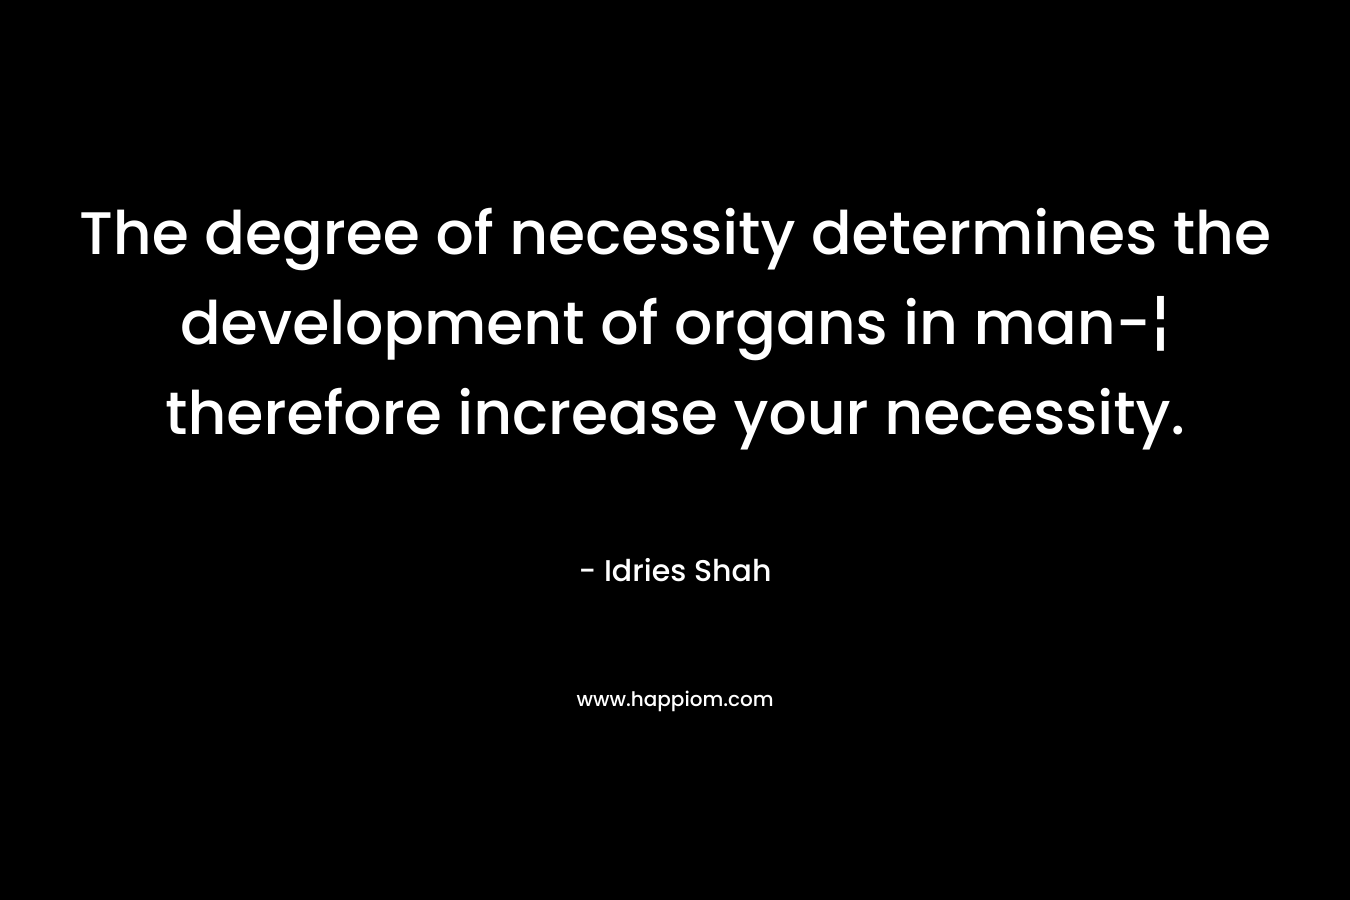 The degree of necessity determines the development of organs in man-¦ therefore increase your necessity.